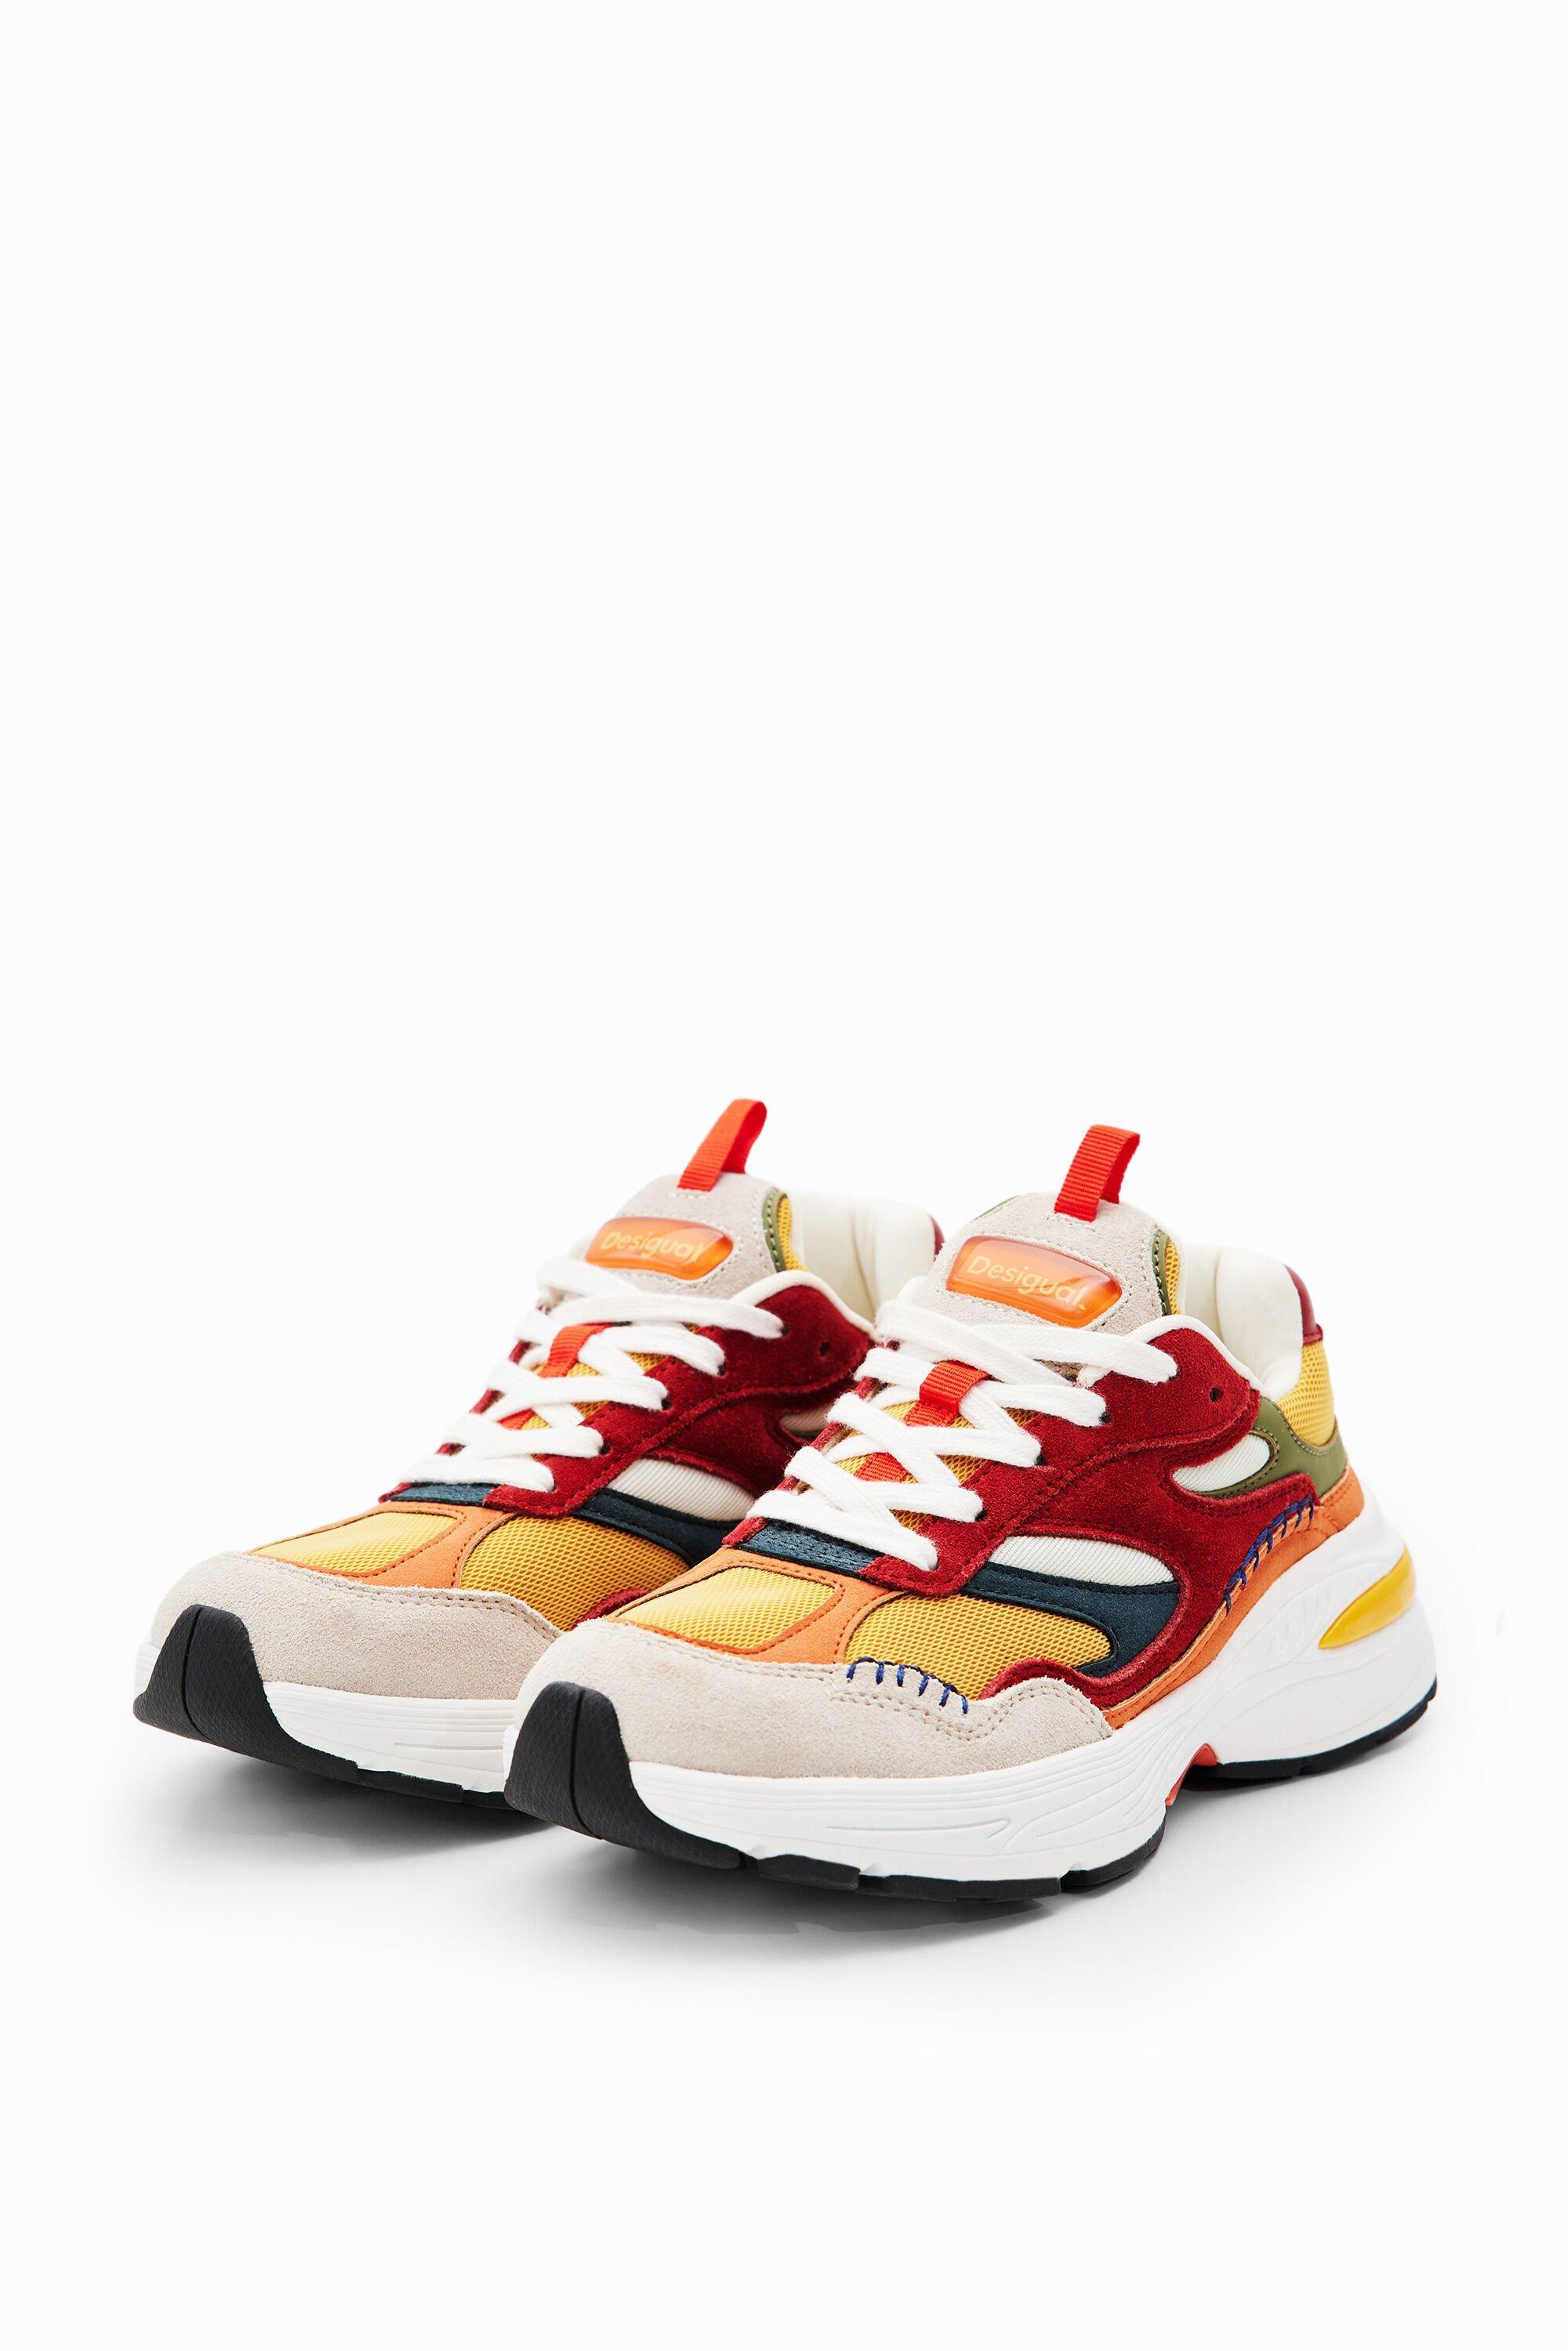 Desigual Patchwork Running Sneakers in White | Lyst